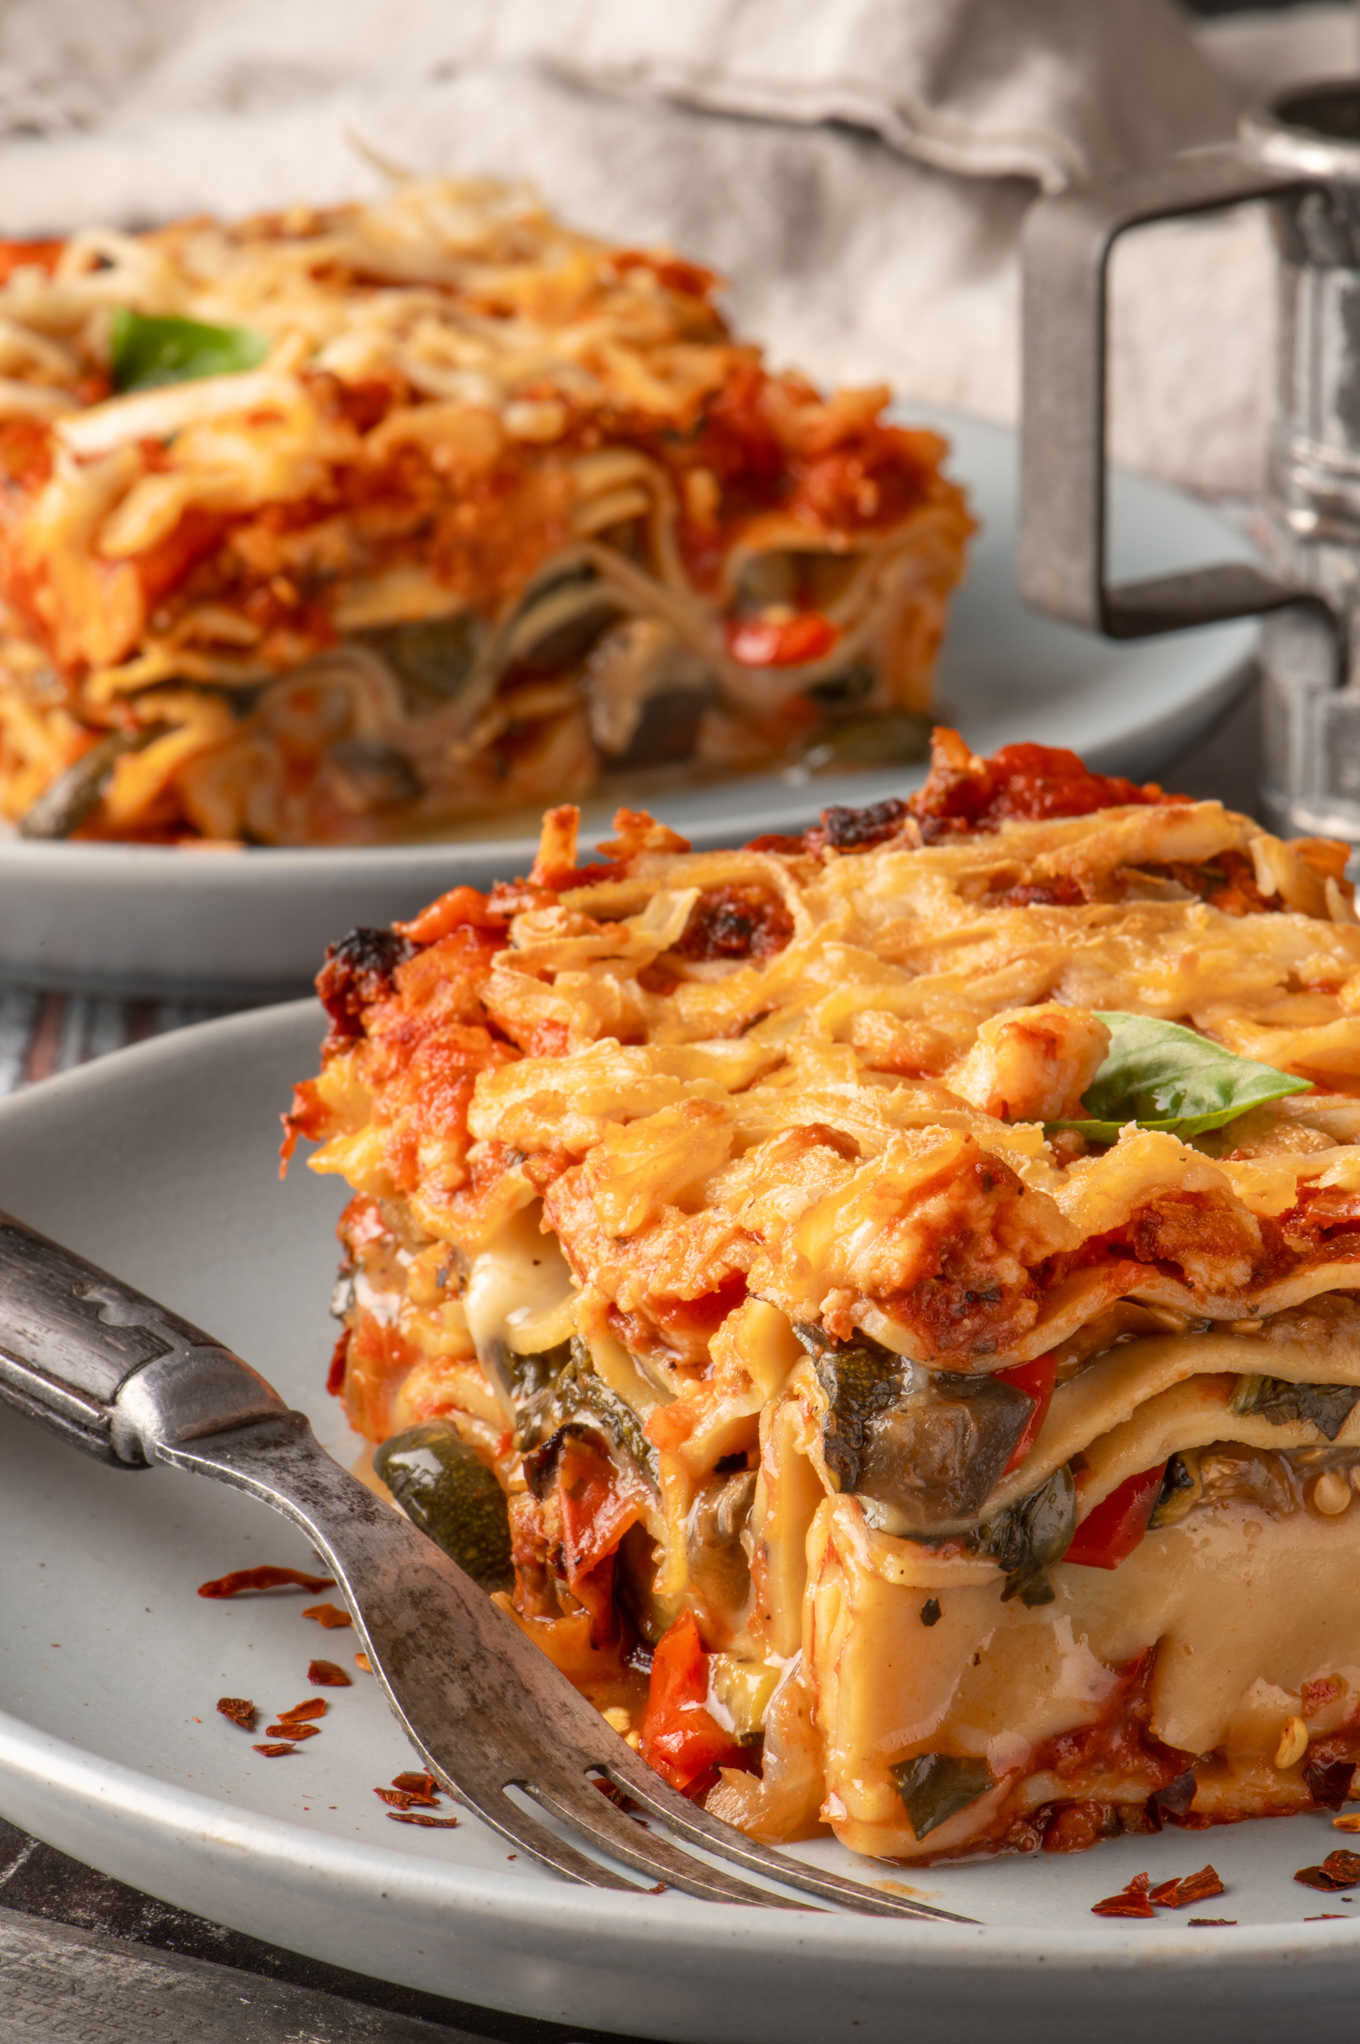 Roasted Vegetable Lasagna Recipe - Planted and Picked